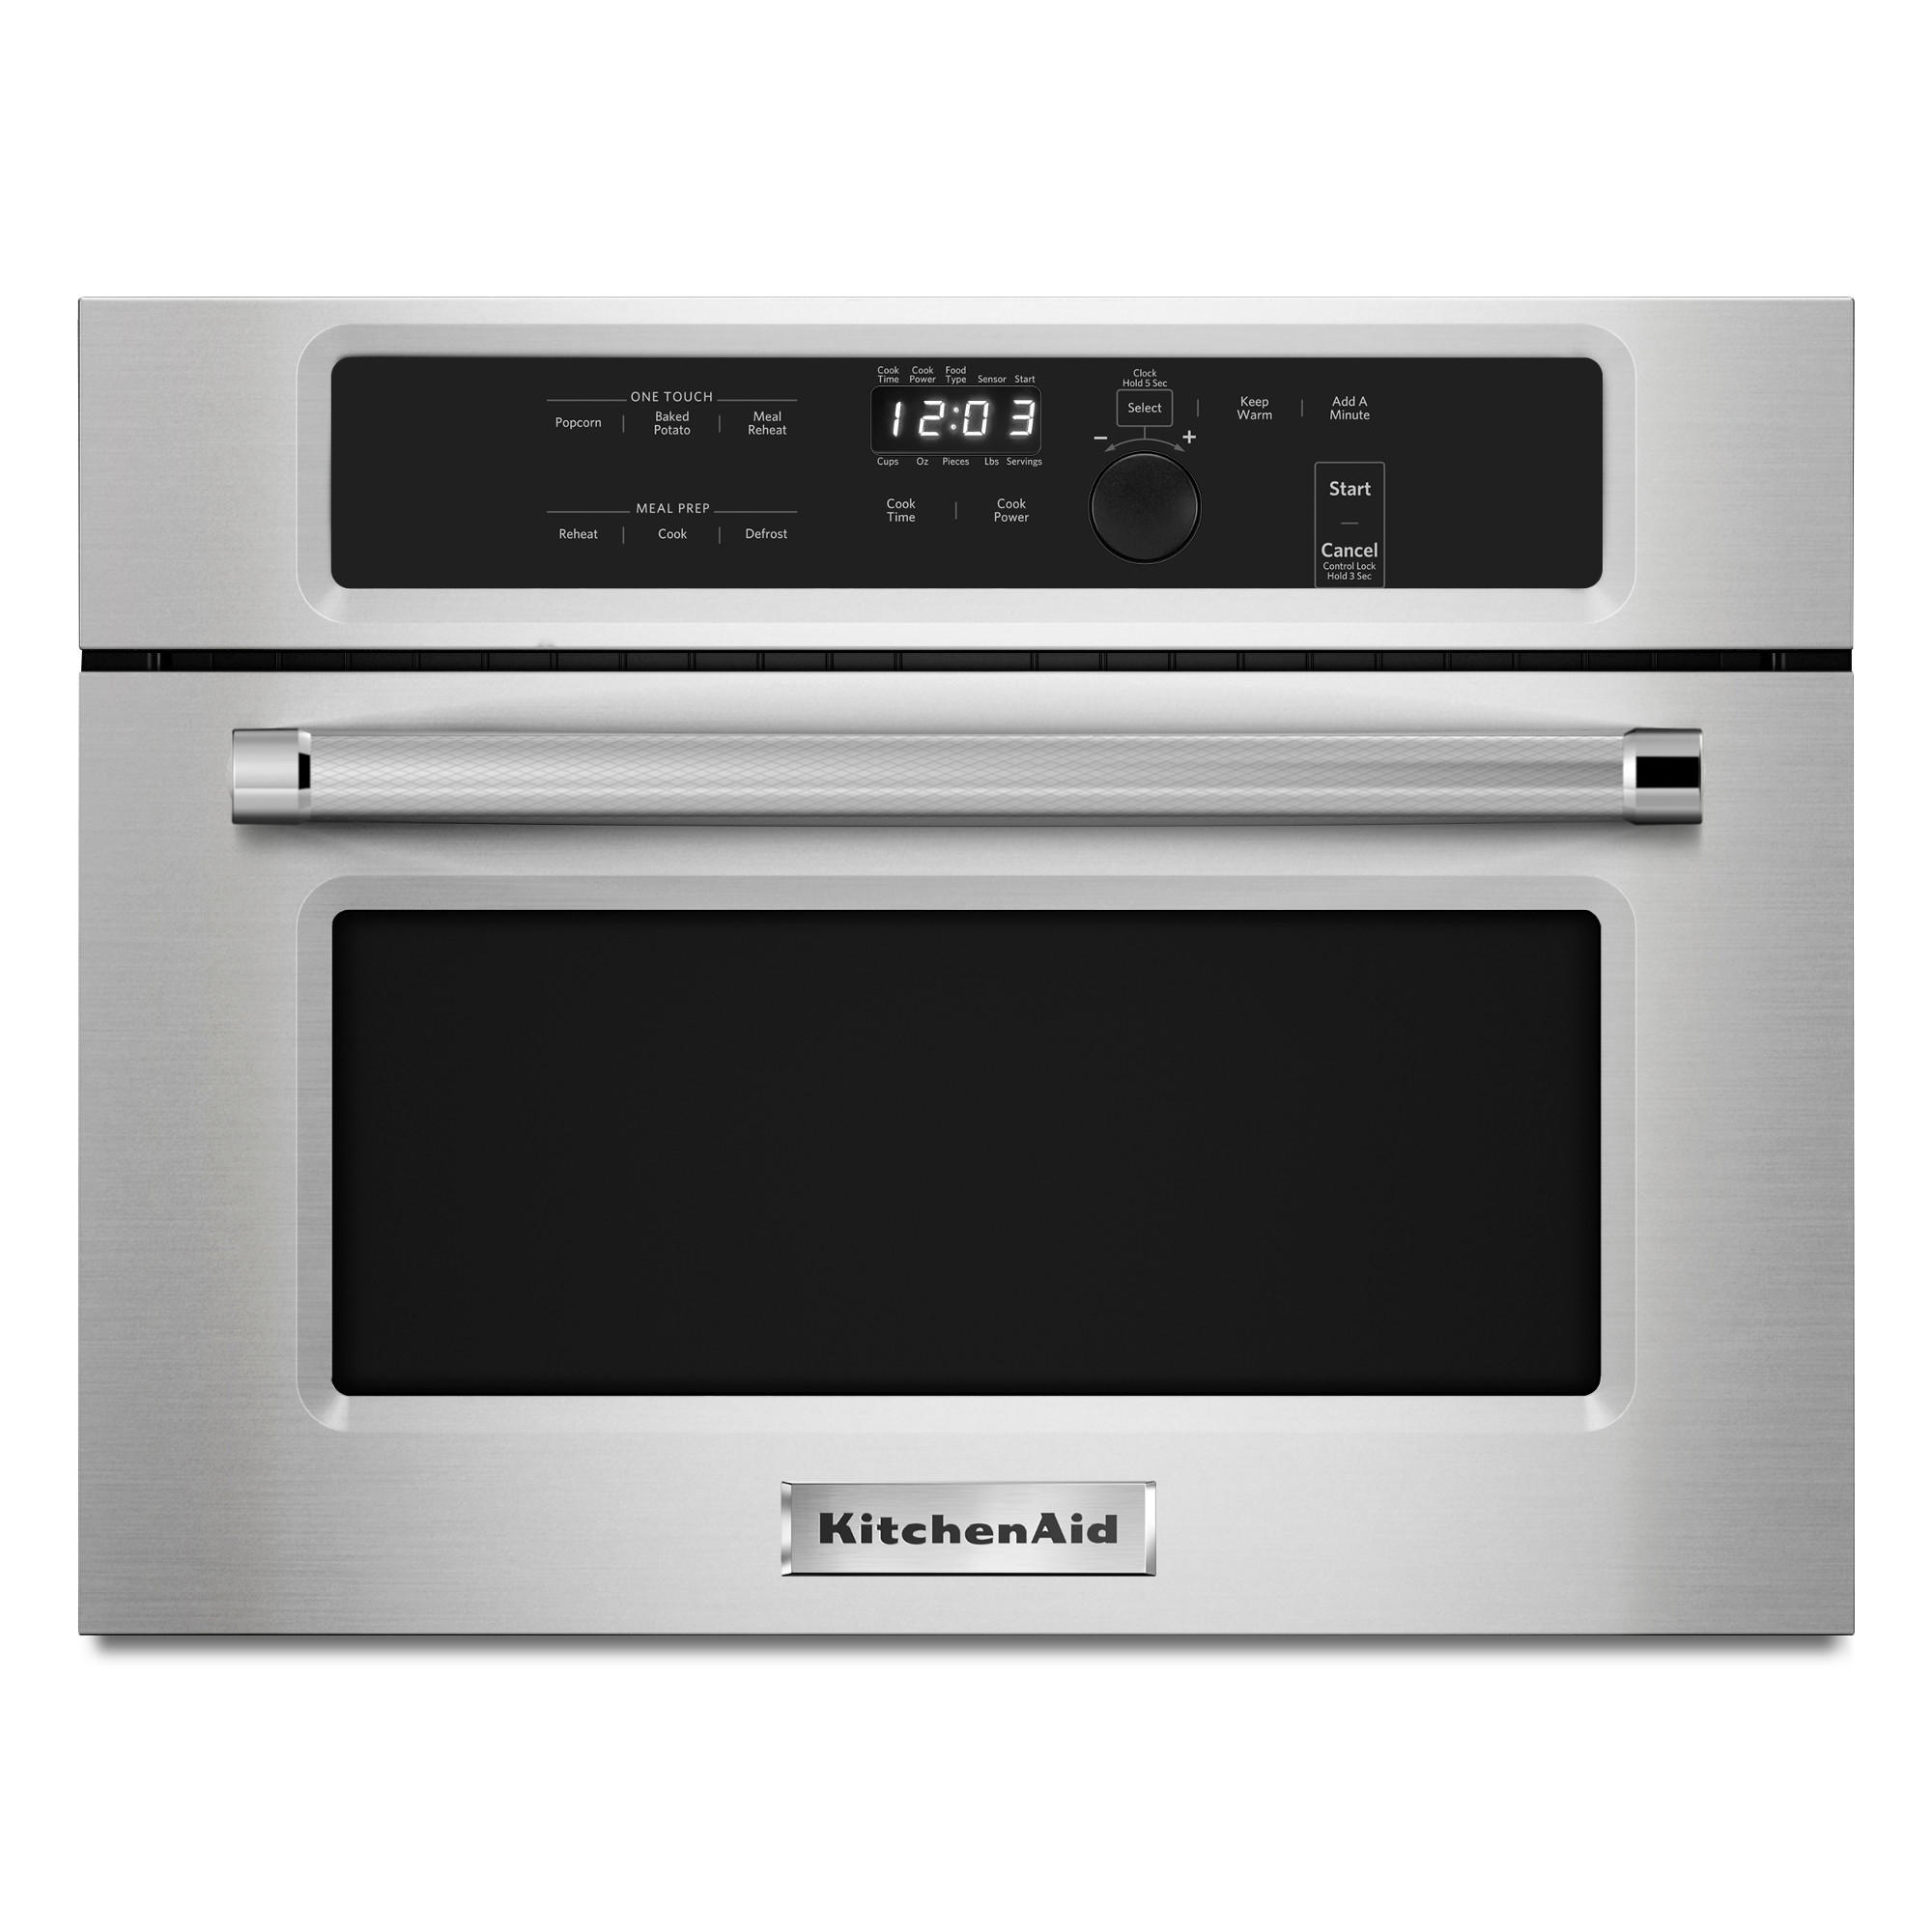 KitchenAid KMBS104ESS 24" Built-In Microwave - Stainless Steel